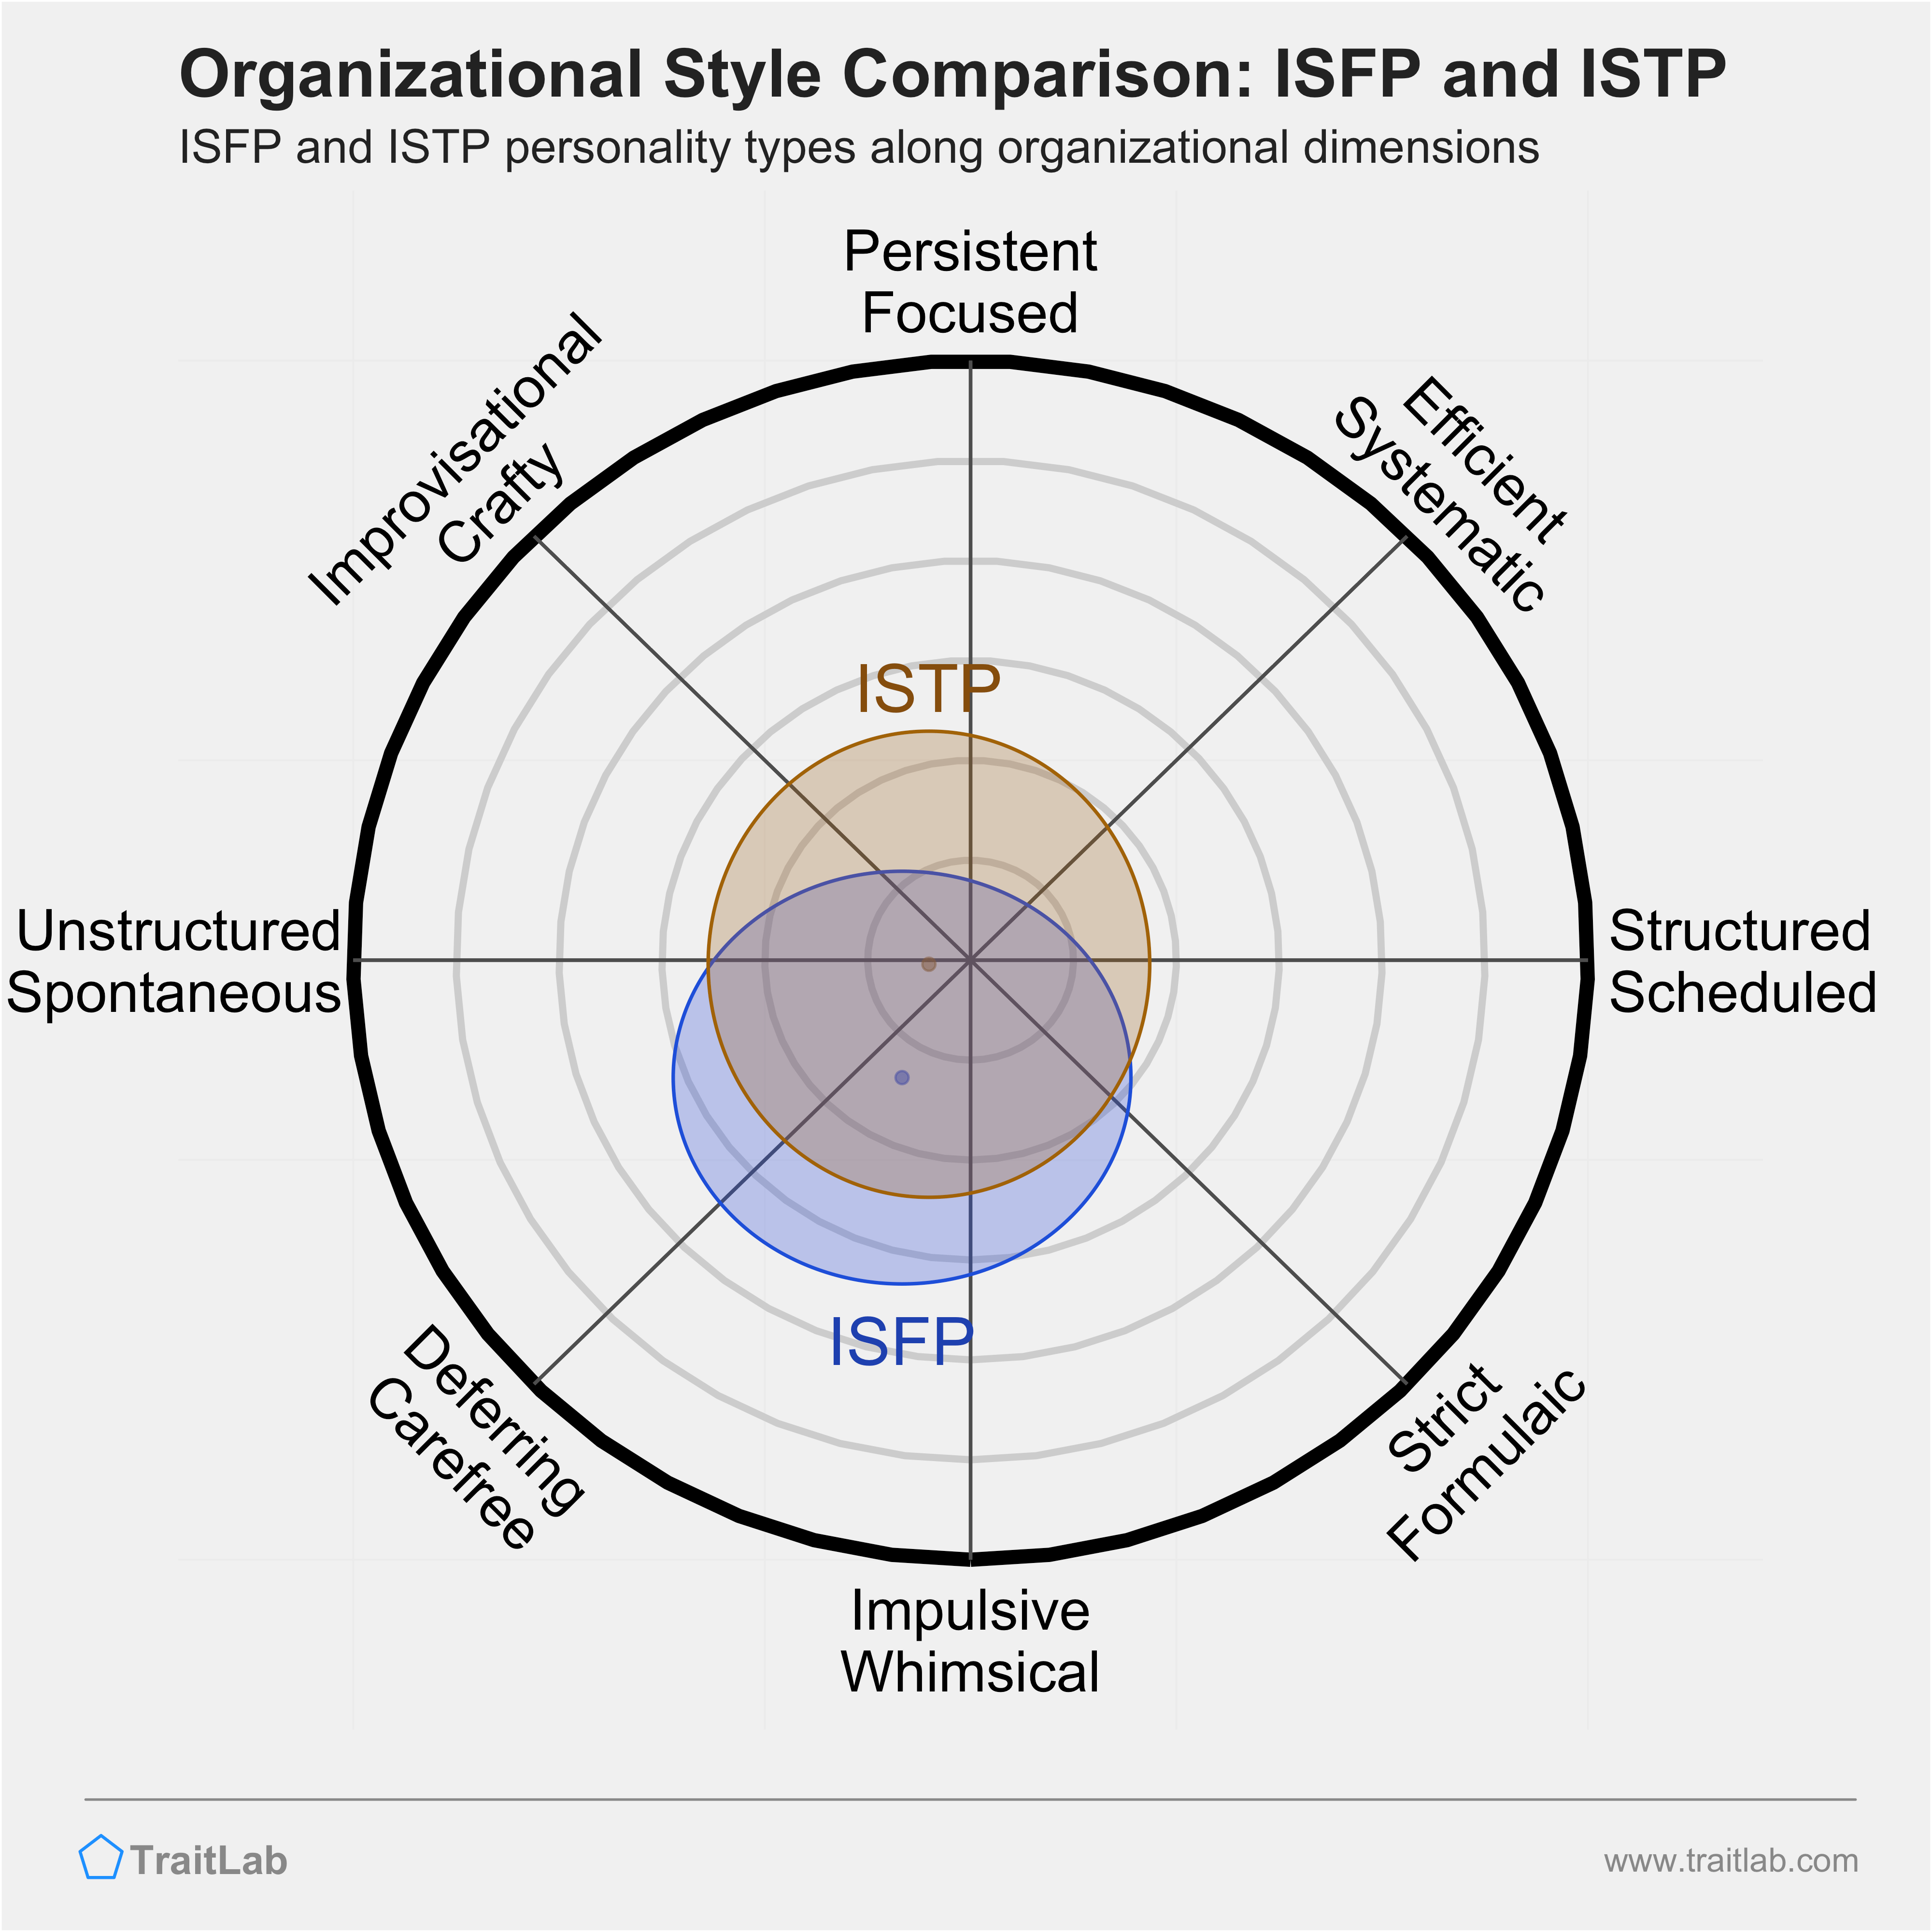 ISFP and ISTP comparison across organizational dimensions